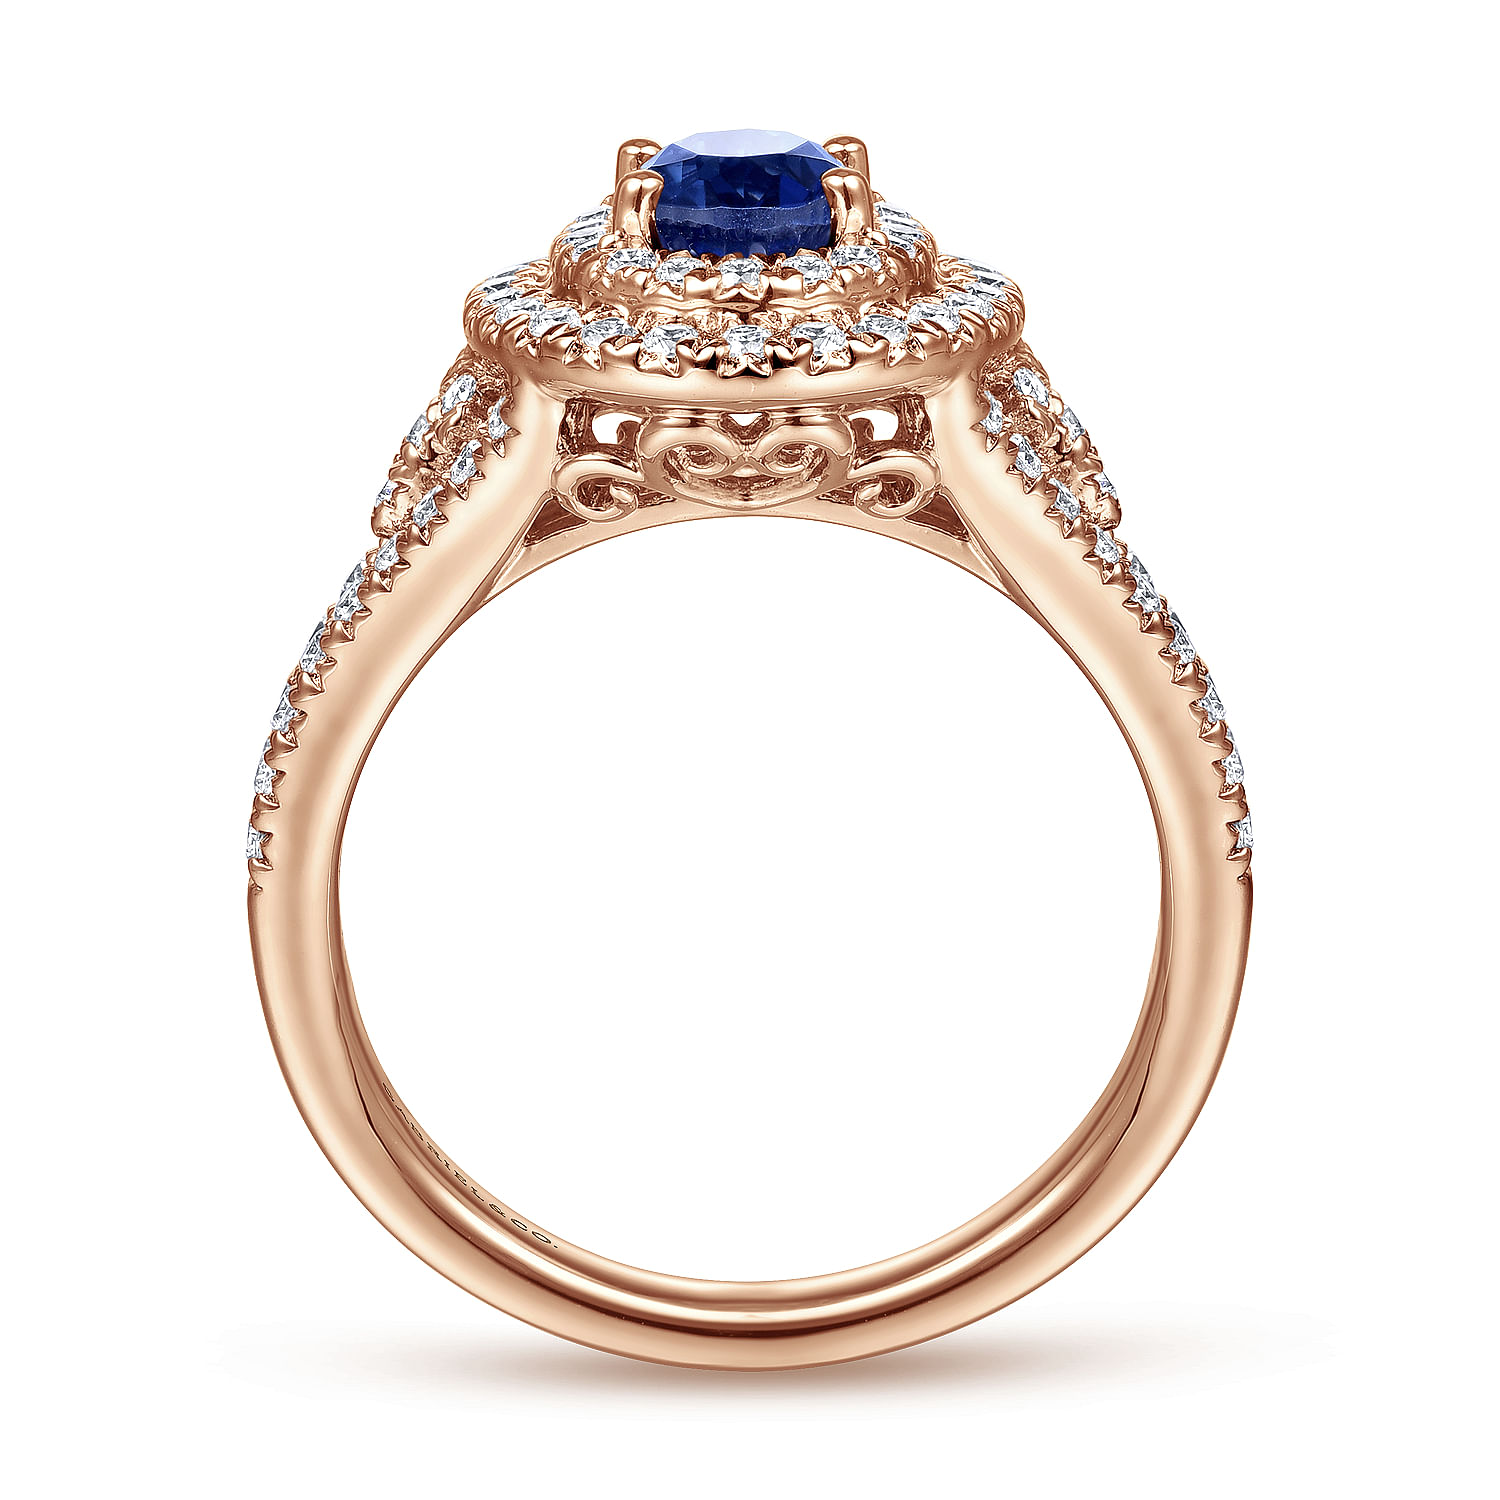 14K Rose Gold Oval Sapphire and Diamond Engagement Ring